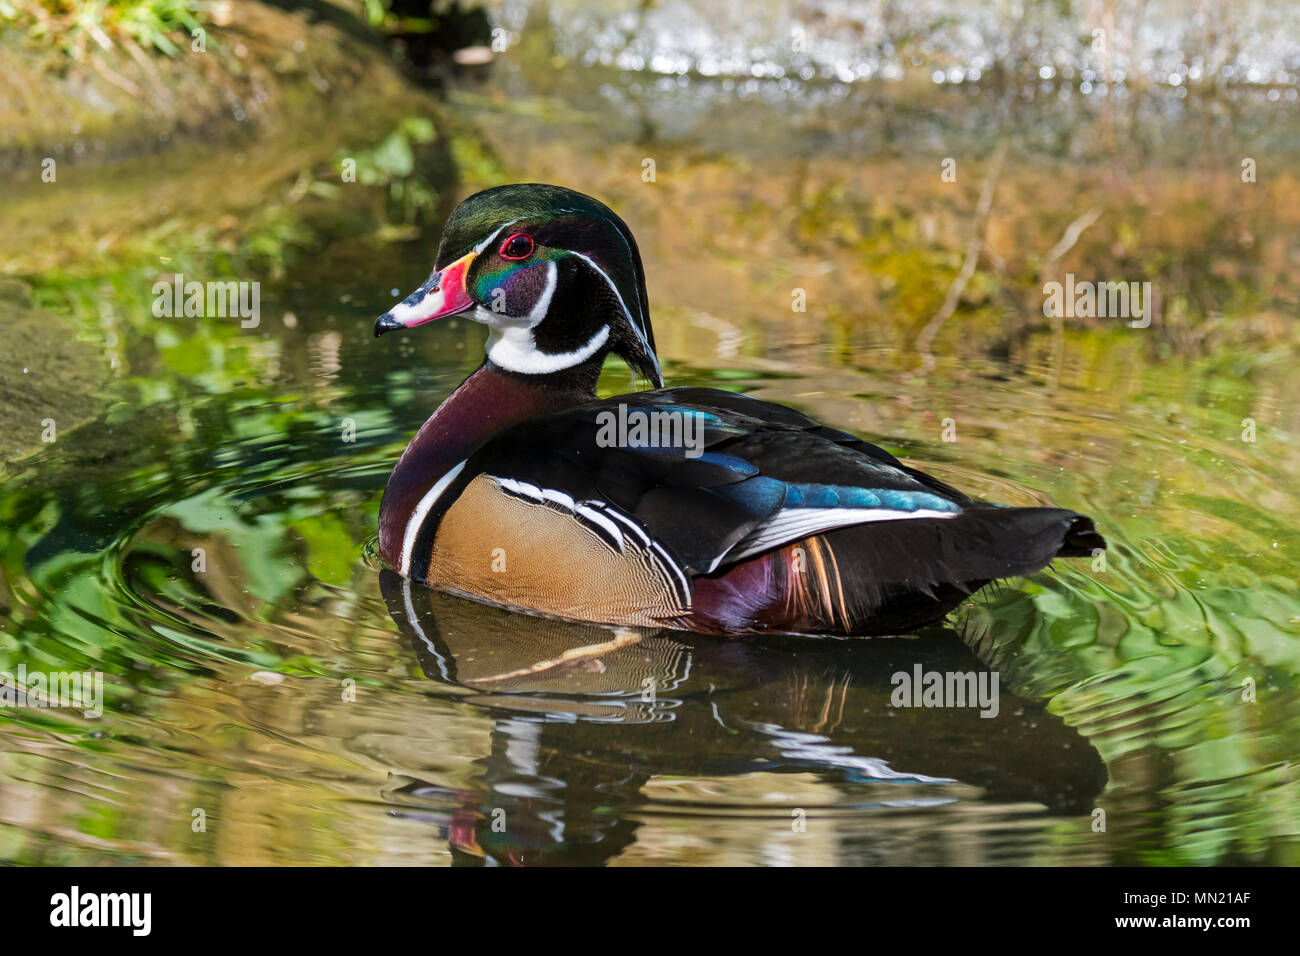 Wood duck / Carolina duck (Aix sponsa / Anas sponsa) male swimming in pond, colorful perching duck native to North America Stock Photo